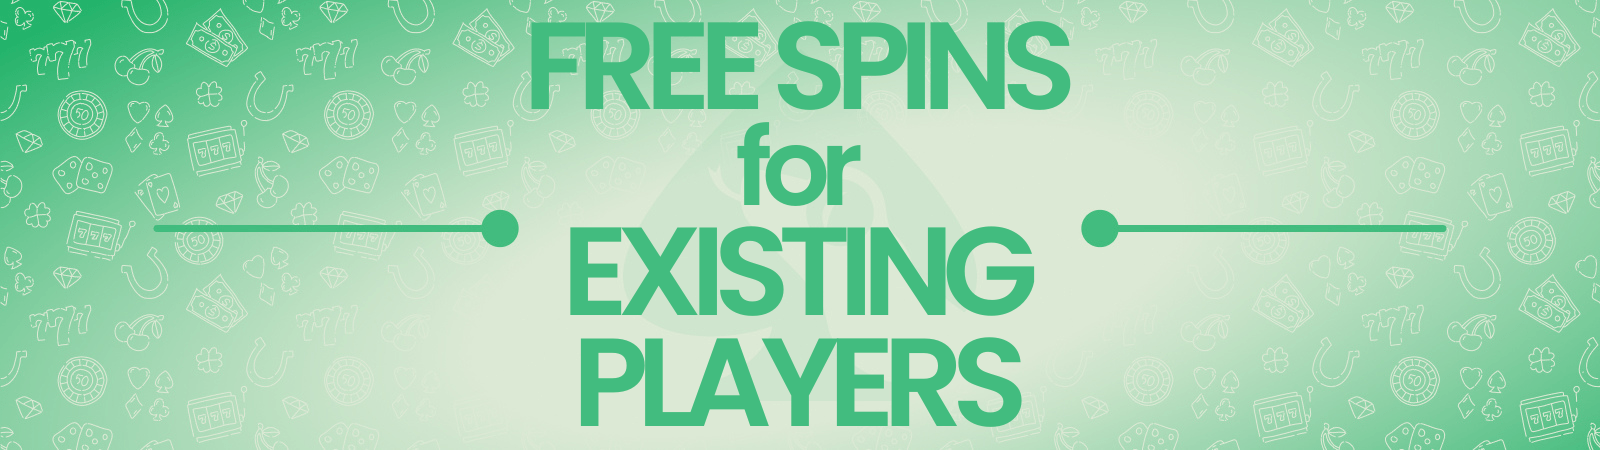 free spins for existing customers uk